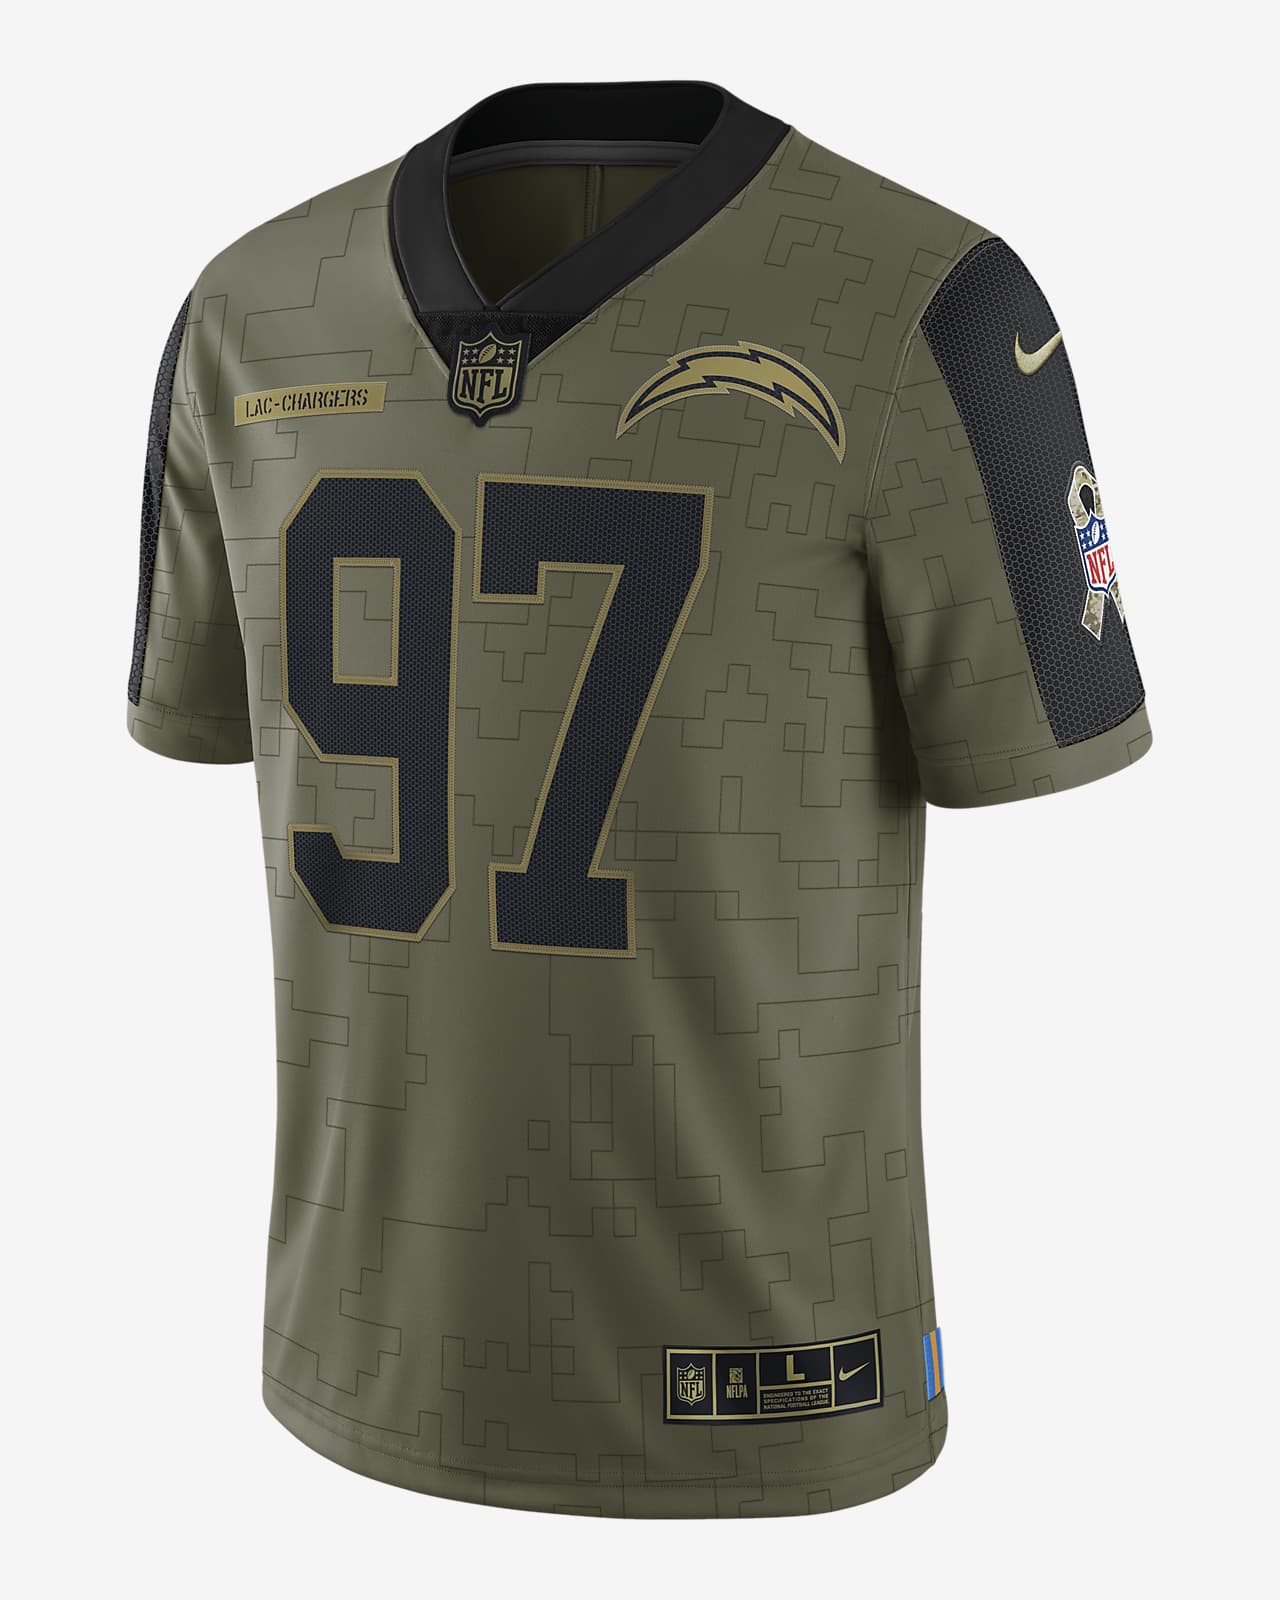 NFL Los Angeles Chargers Salute to Service (Joey Bosa) Men's Limited Football Jersey